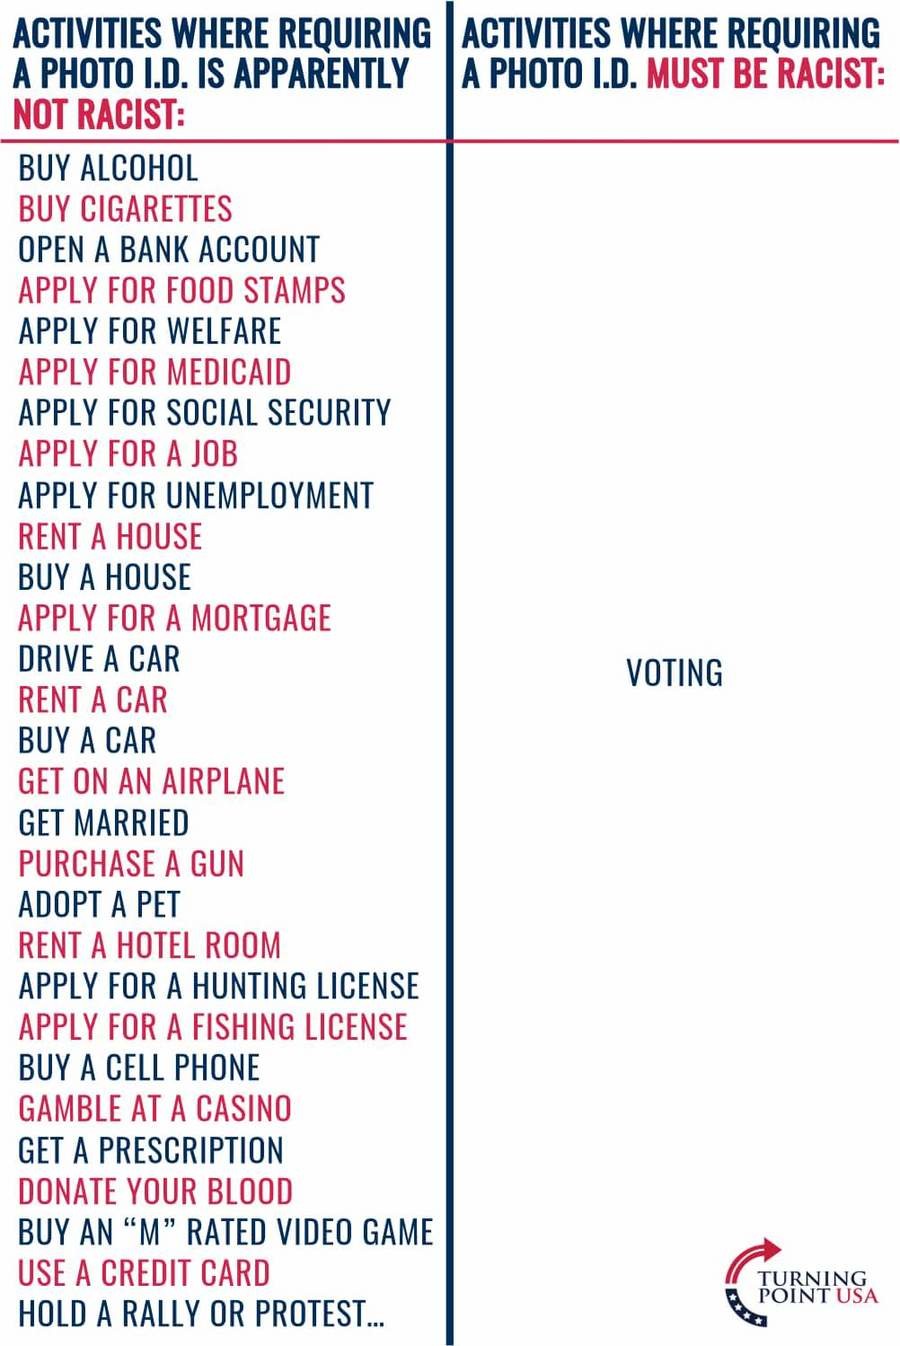 list of activities that require ID in the USA, vs. voting as the only exception